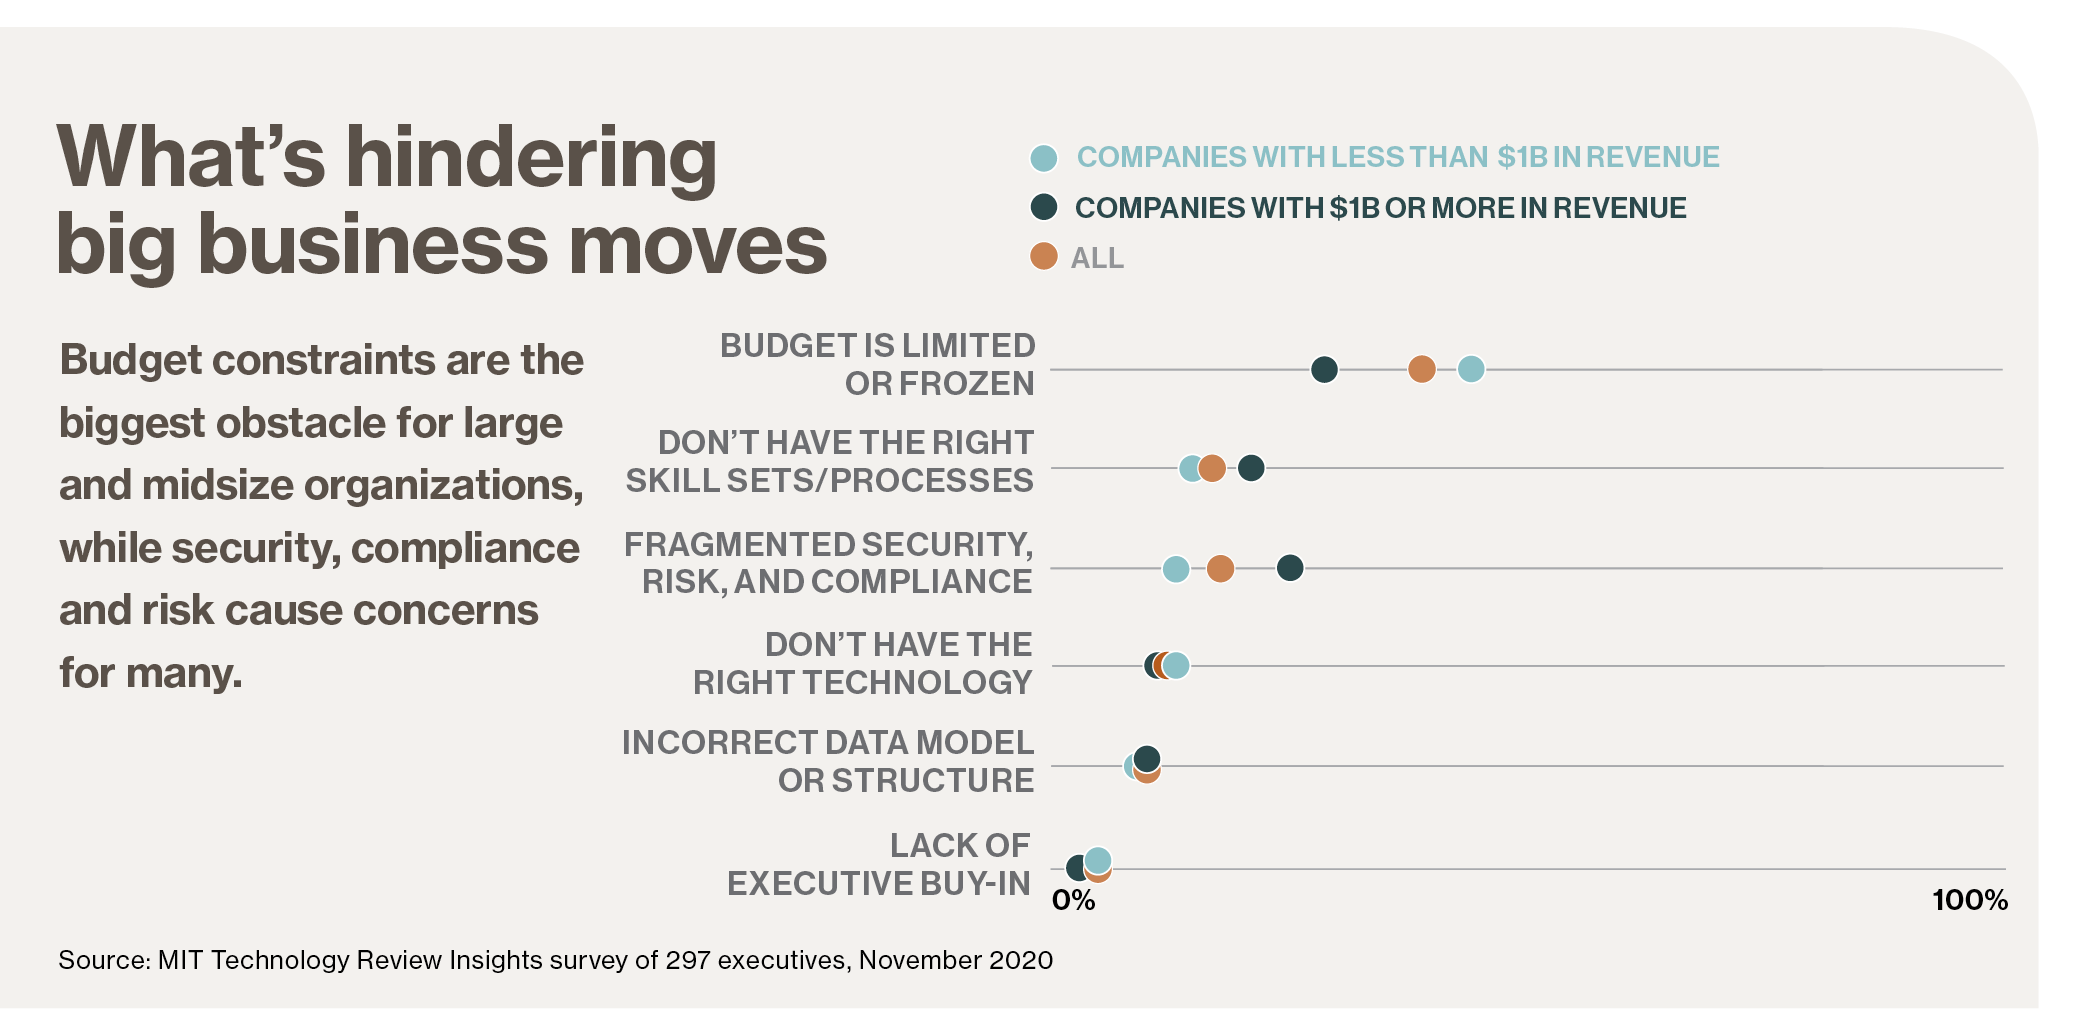 2021 planning: New business models, big opportunity – MIT Technology Review